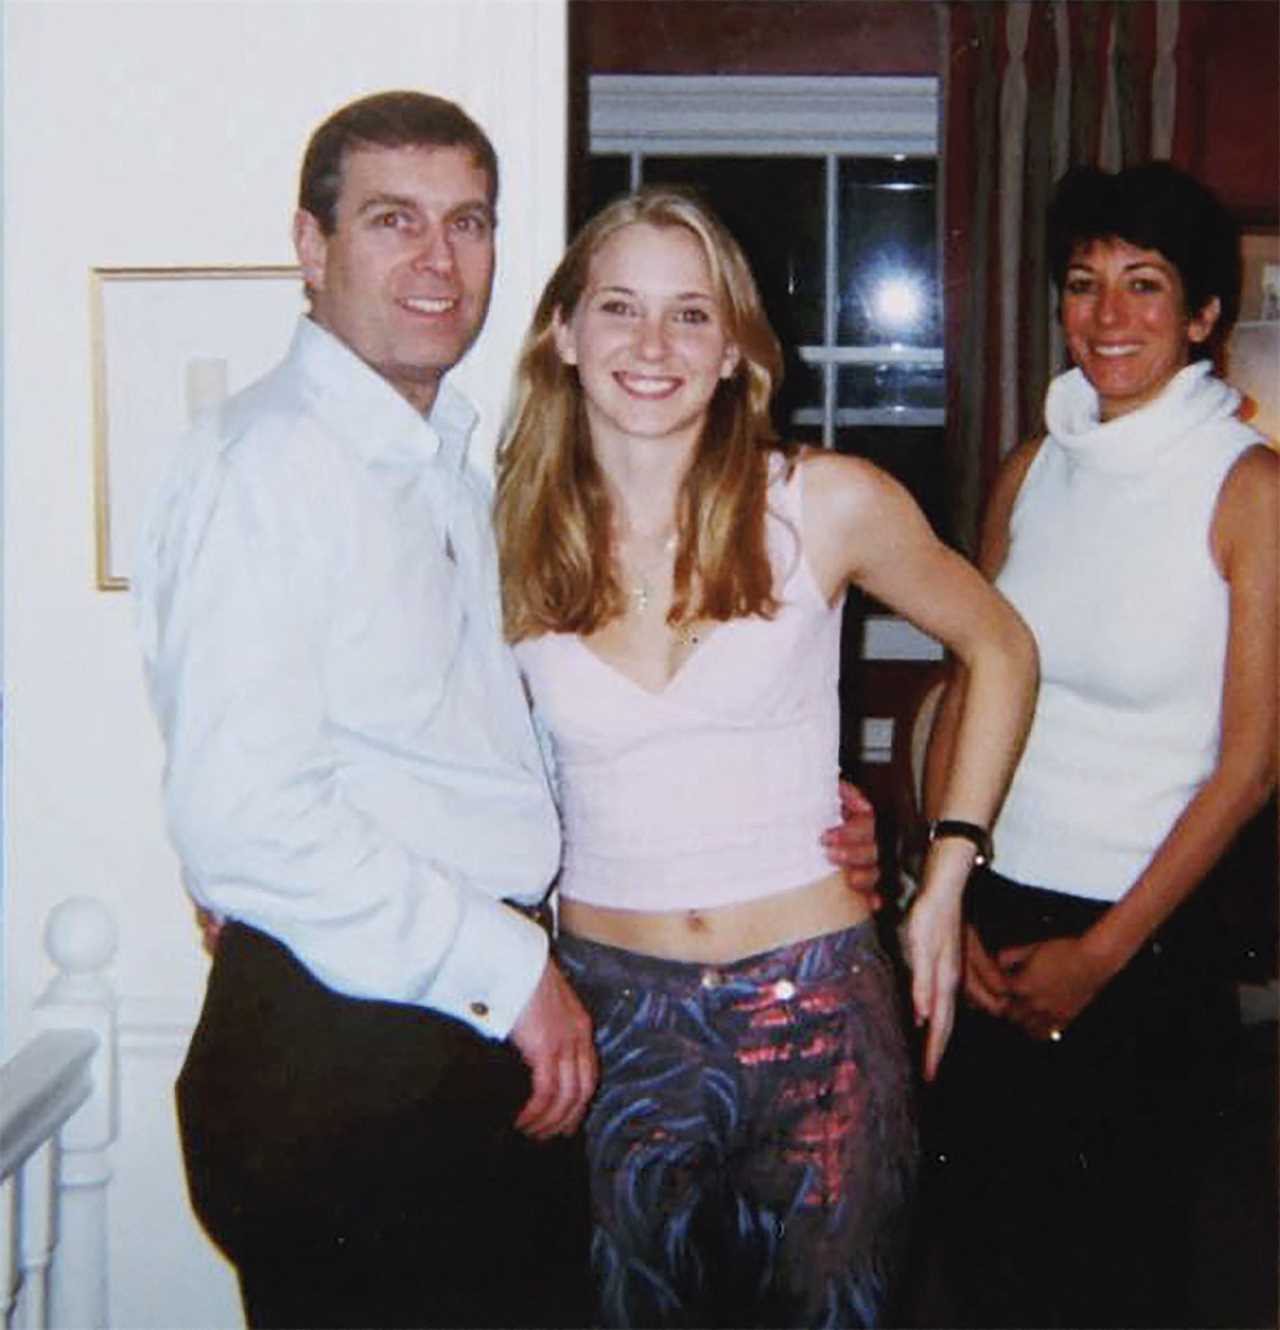 Prince Andrew faces new embarrassment after accuser Ms Giuffre ‘signs tell-all memoir deal’